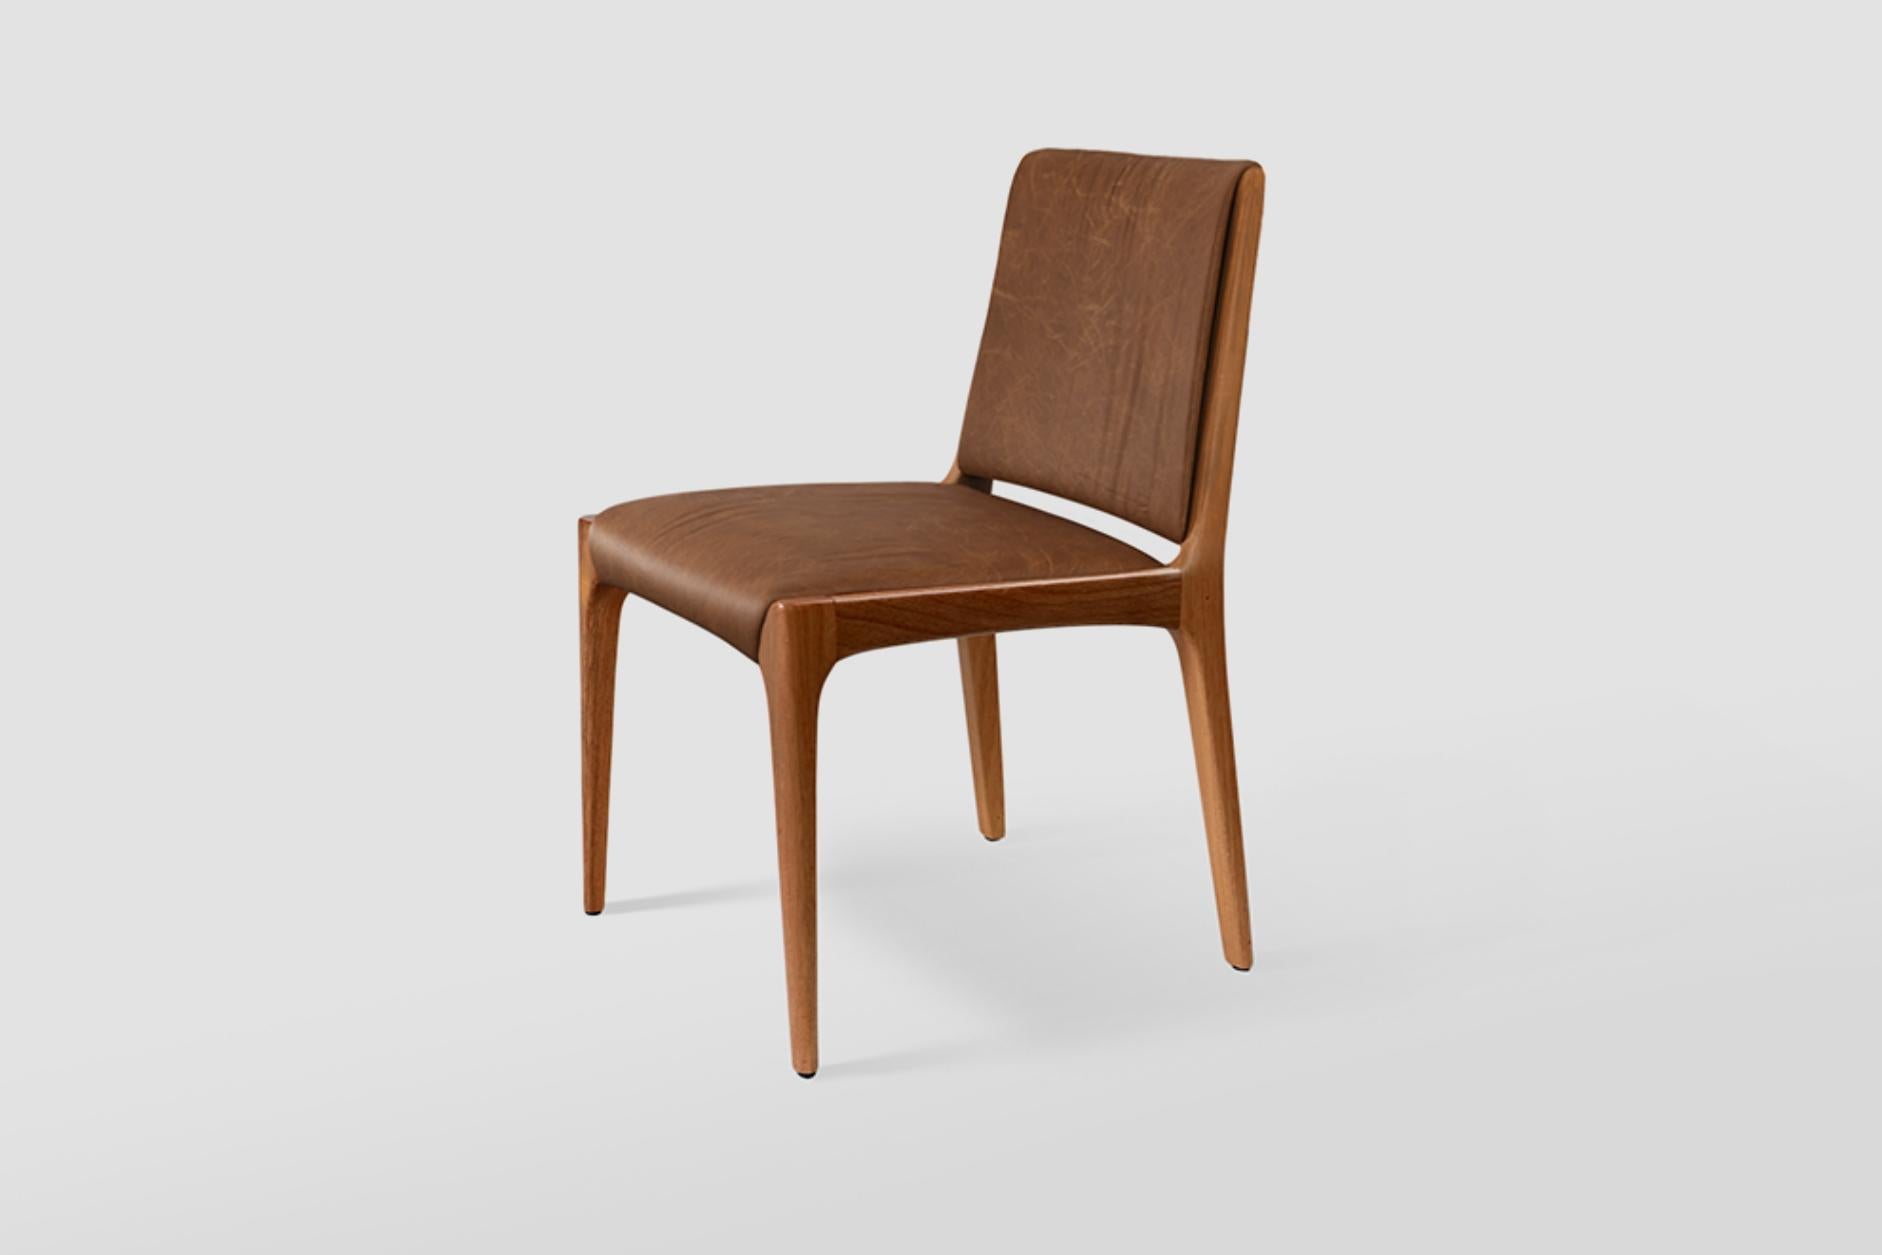 When she created Joca chair, Alessandra Delgado wanted a piece with delicate features, exploring the curves of the wood with a design inspired by the master designer Joaquim Tenreiro's work. Joca chair is made of solid wood and although very sturdy